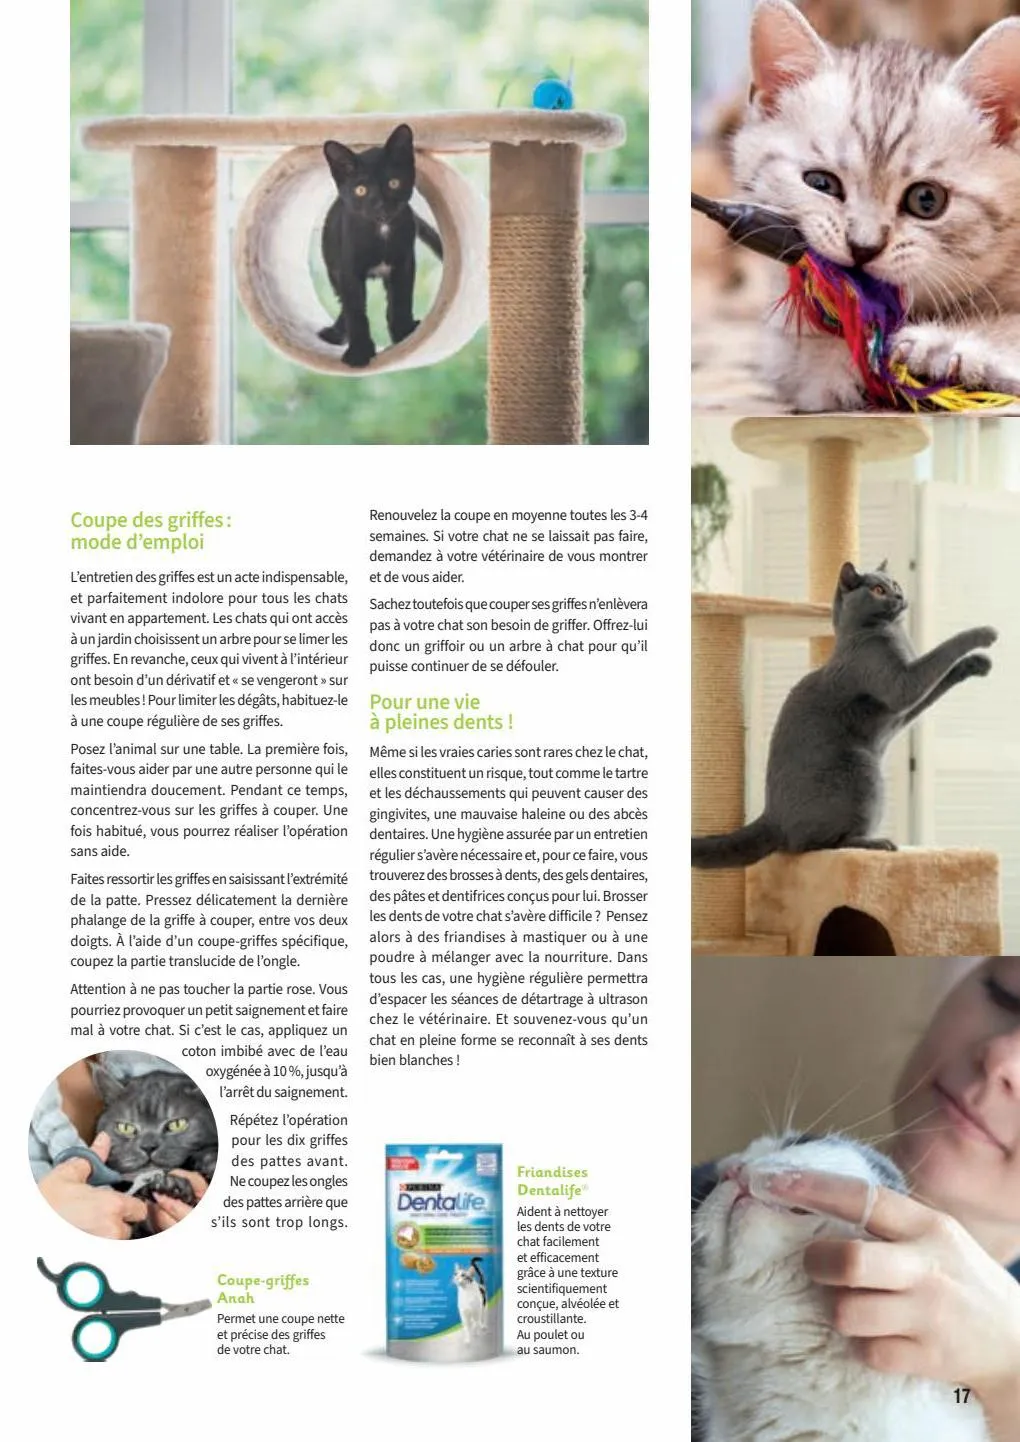 Catalogue Guide chiens et chats 2022-2023, page 00017